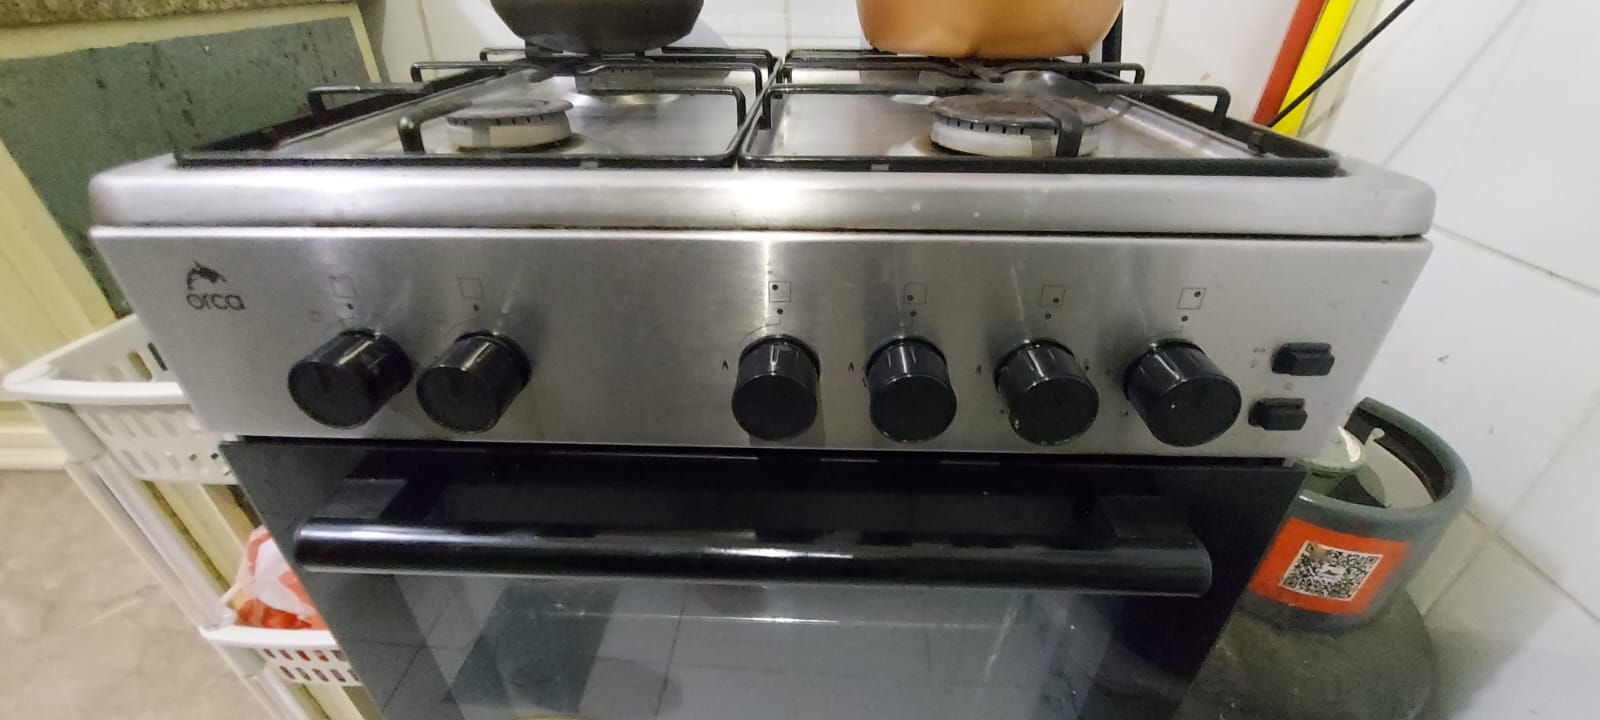 Orka 4 burner with oven and full safety